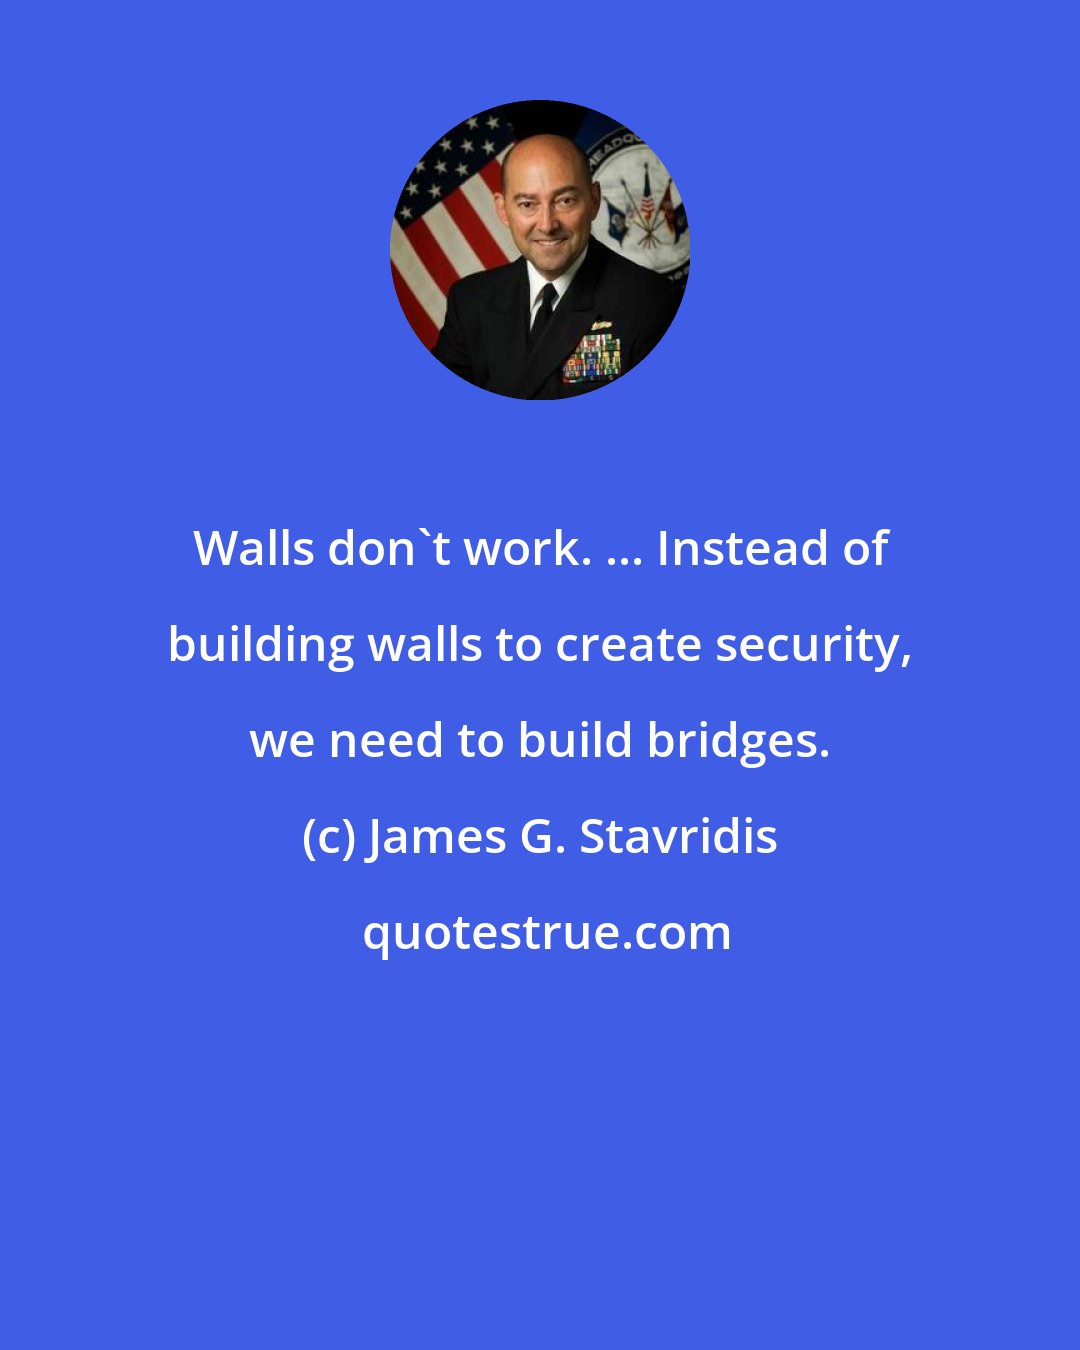 James G. Stavridis: Walls don't work. ... Instead of building walls to create security, we need to build bridges.